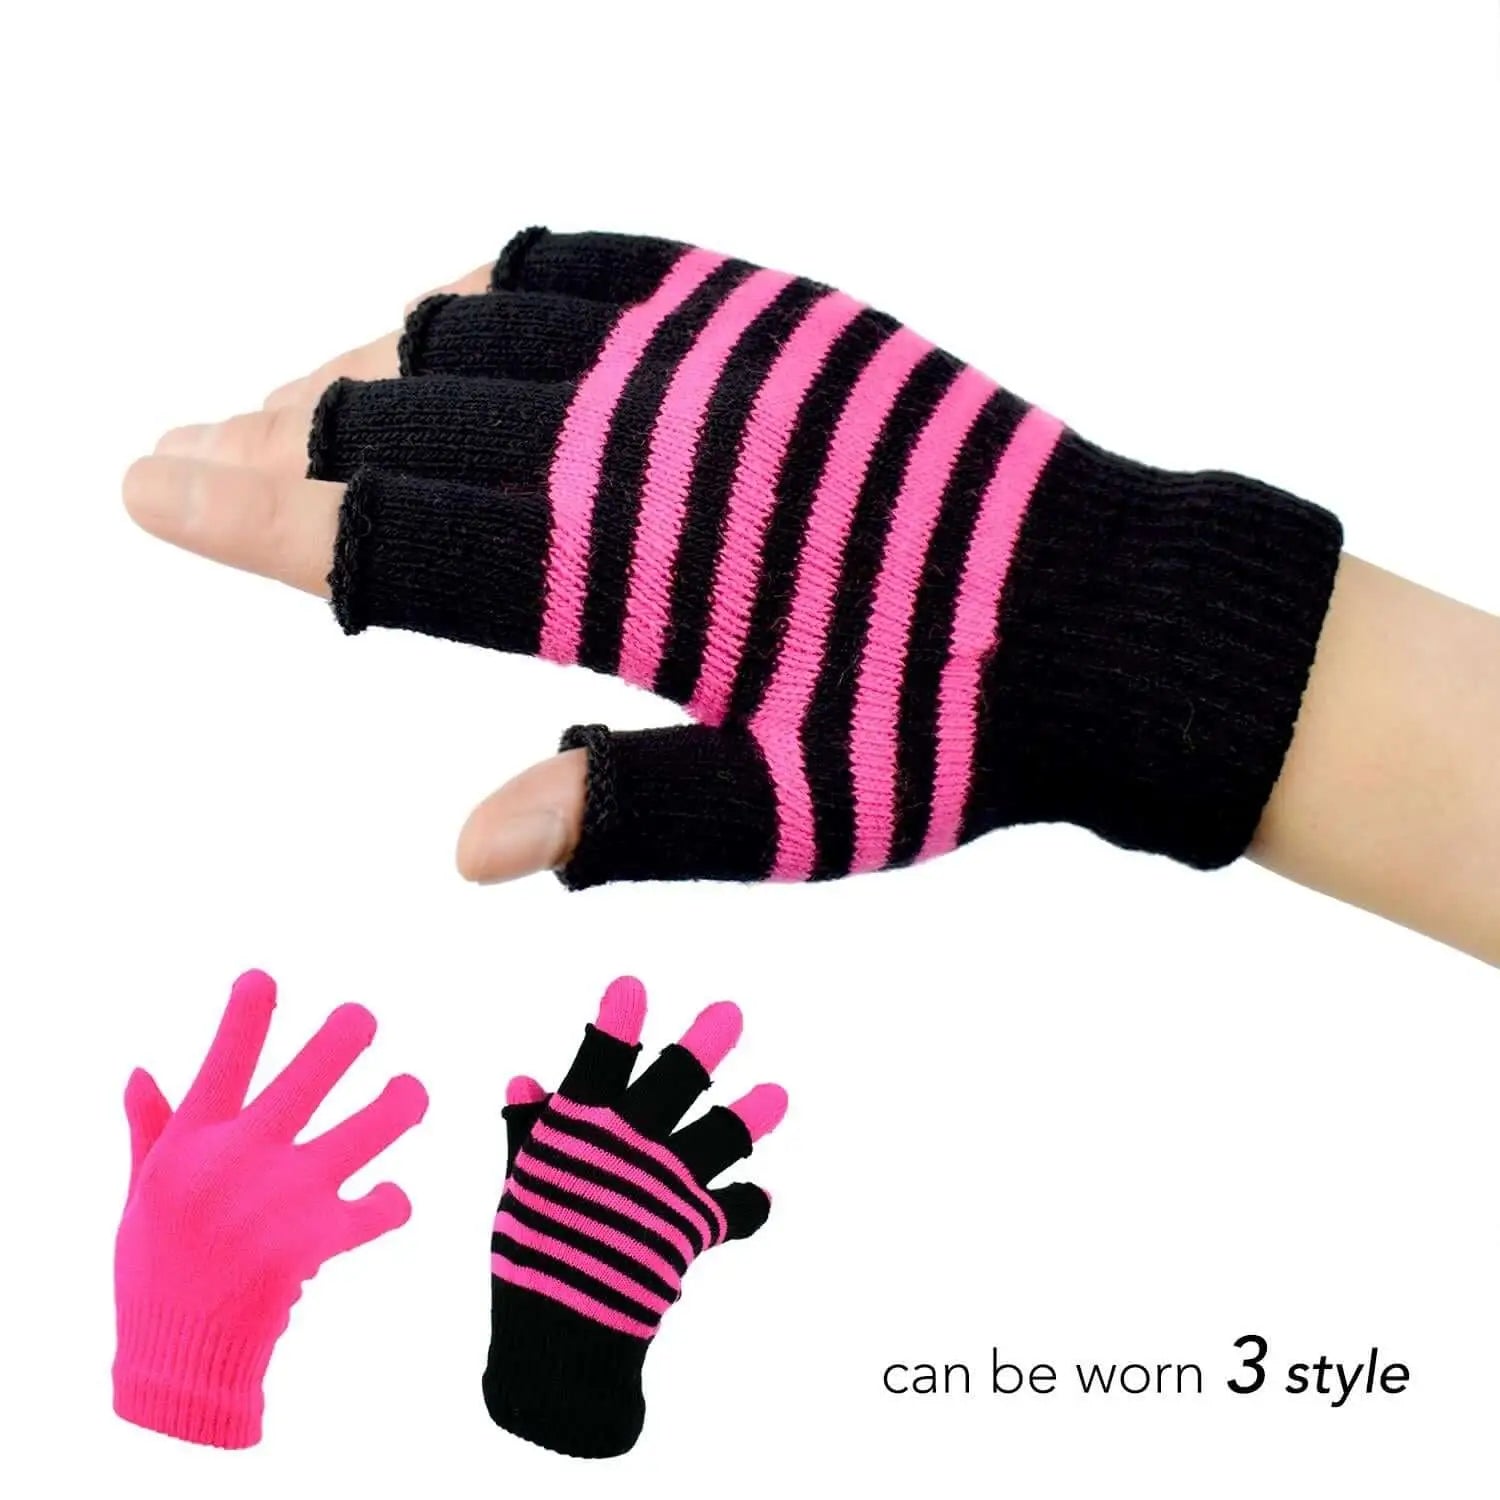 Pink and black fingerless magic gloves with hand - Neon 2-in-1 Full & Fingerless Magic Glove Pack